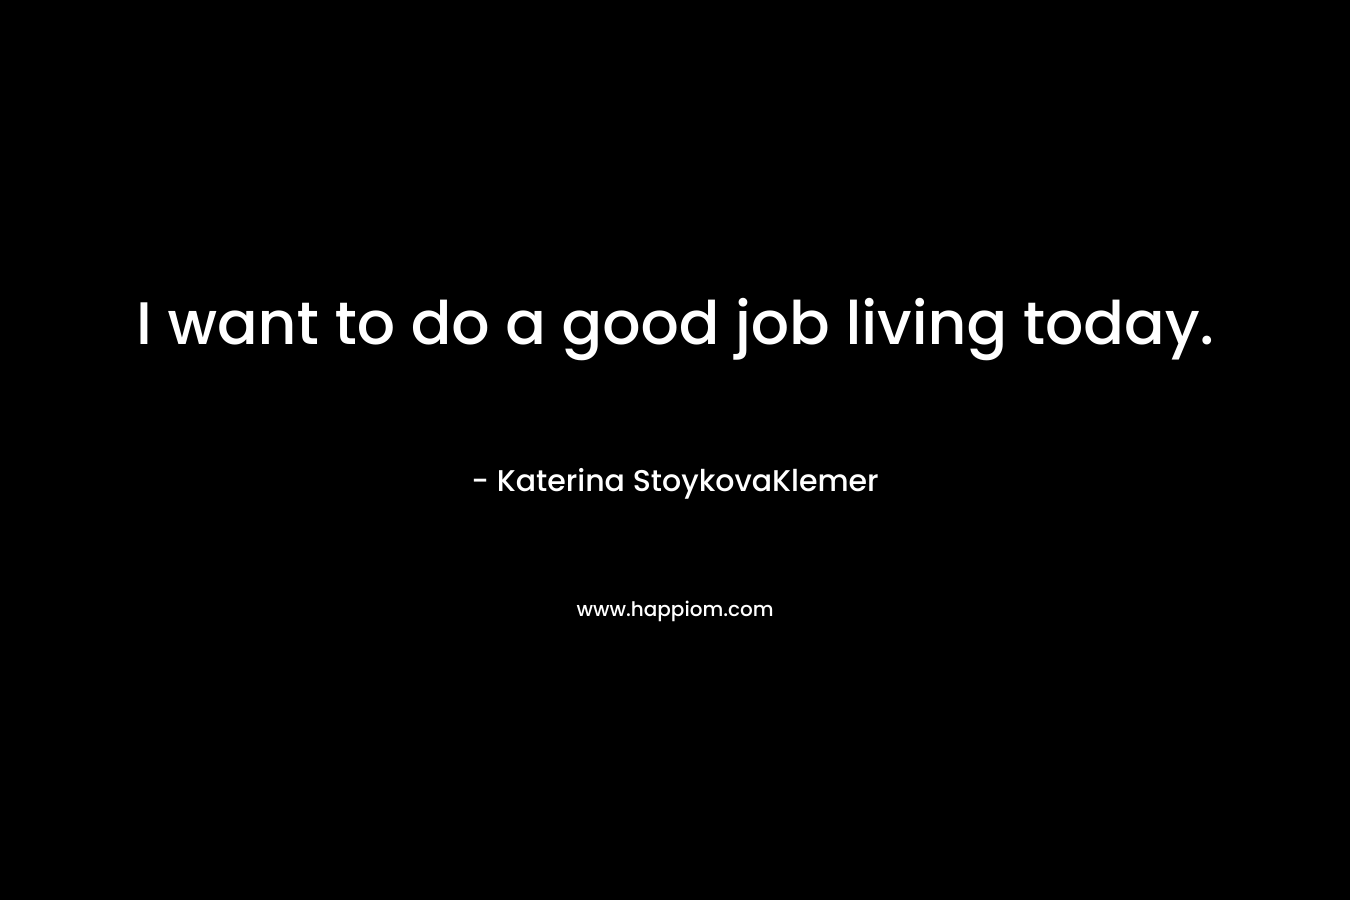 I want to do a good job living today.